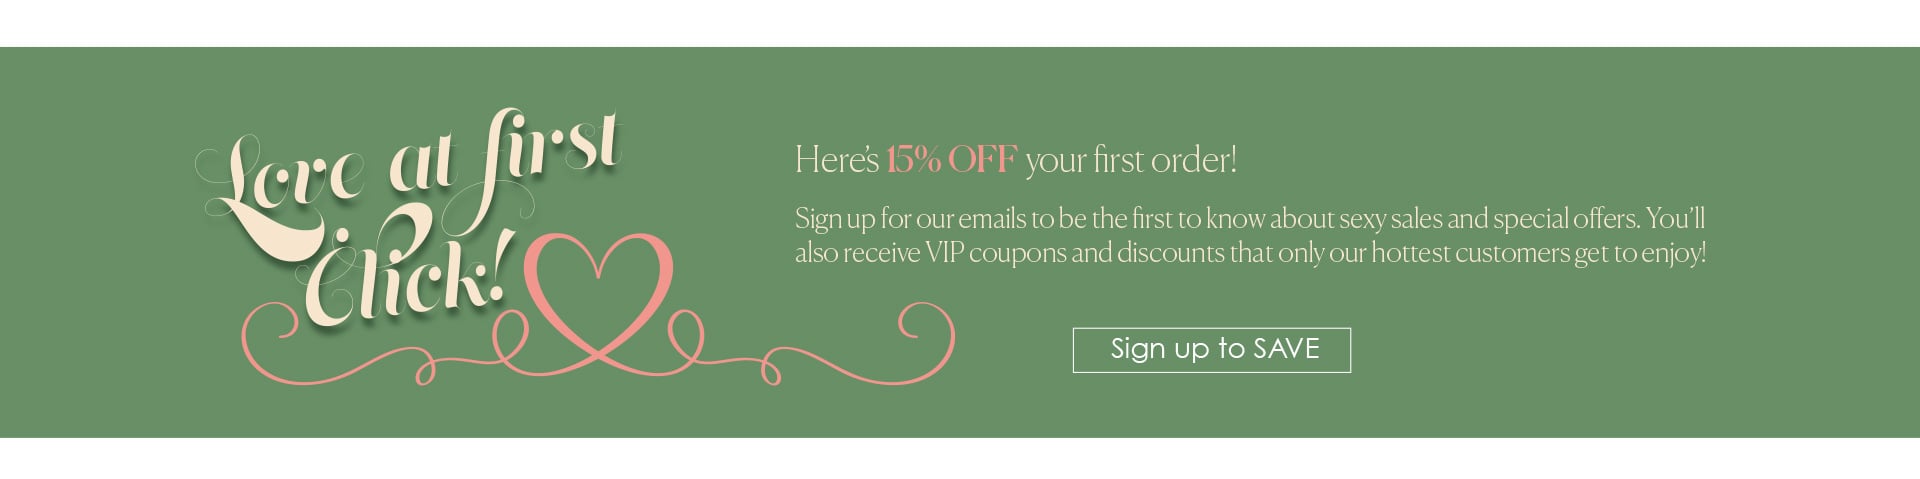 Love at First Click - Here’s 15% OFF your first order! - Sign up for our emails to be the first to know about sexy sales and special offers. You’ll also receive VIP coupons and  discounts that only our hottest  customers get to enjoy!